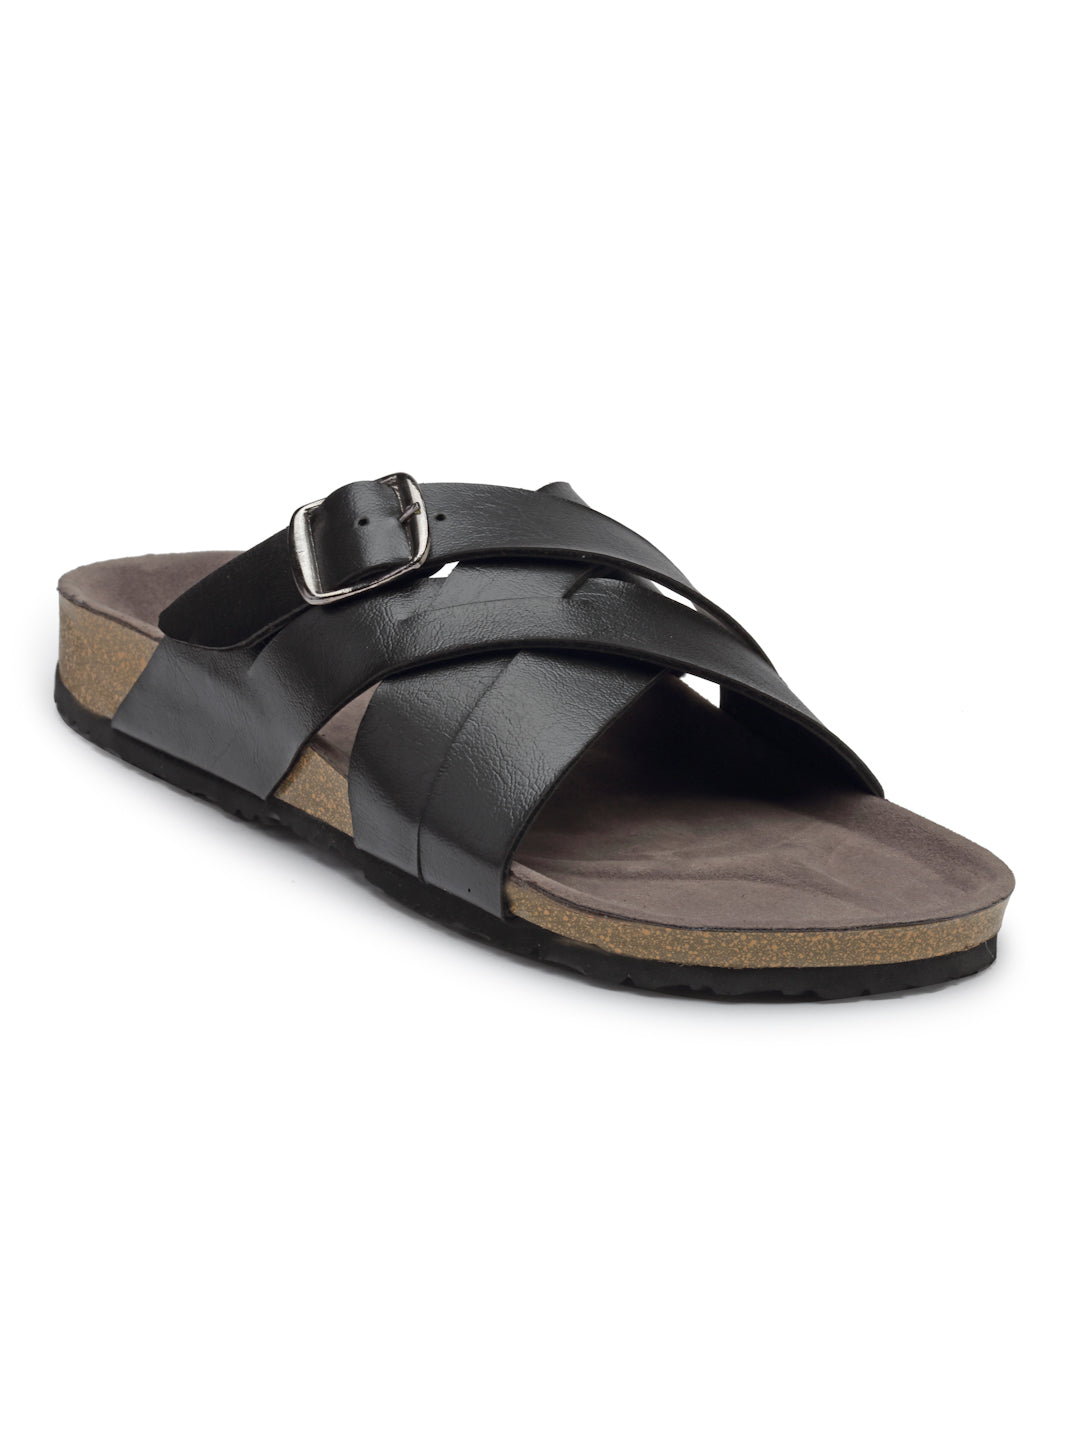 Men's Black Synthetic Leather Slip On Casual Sandals